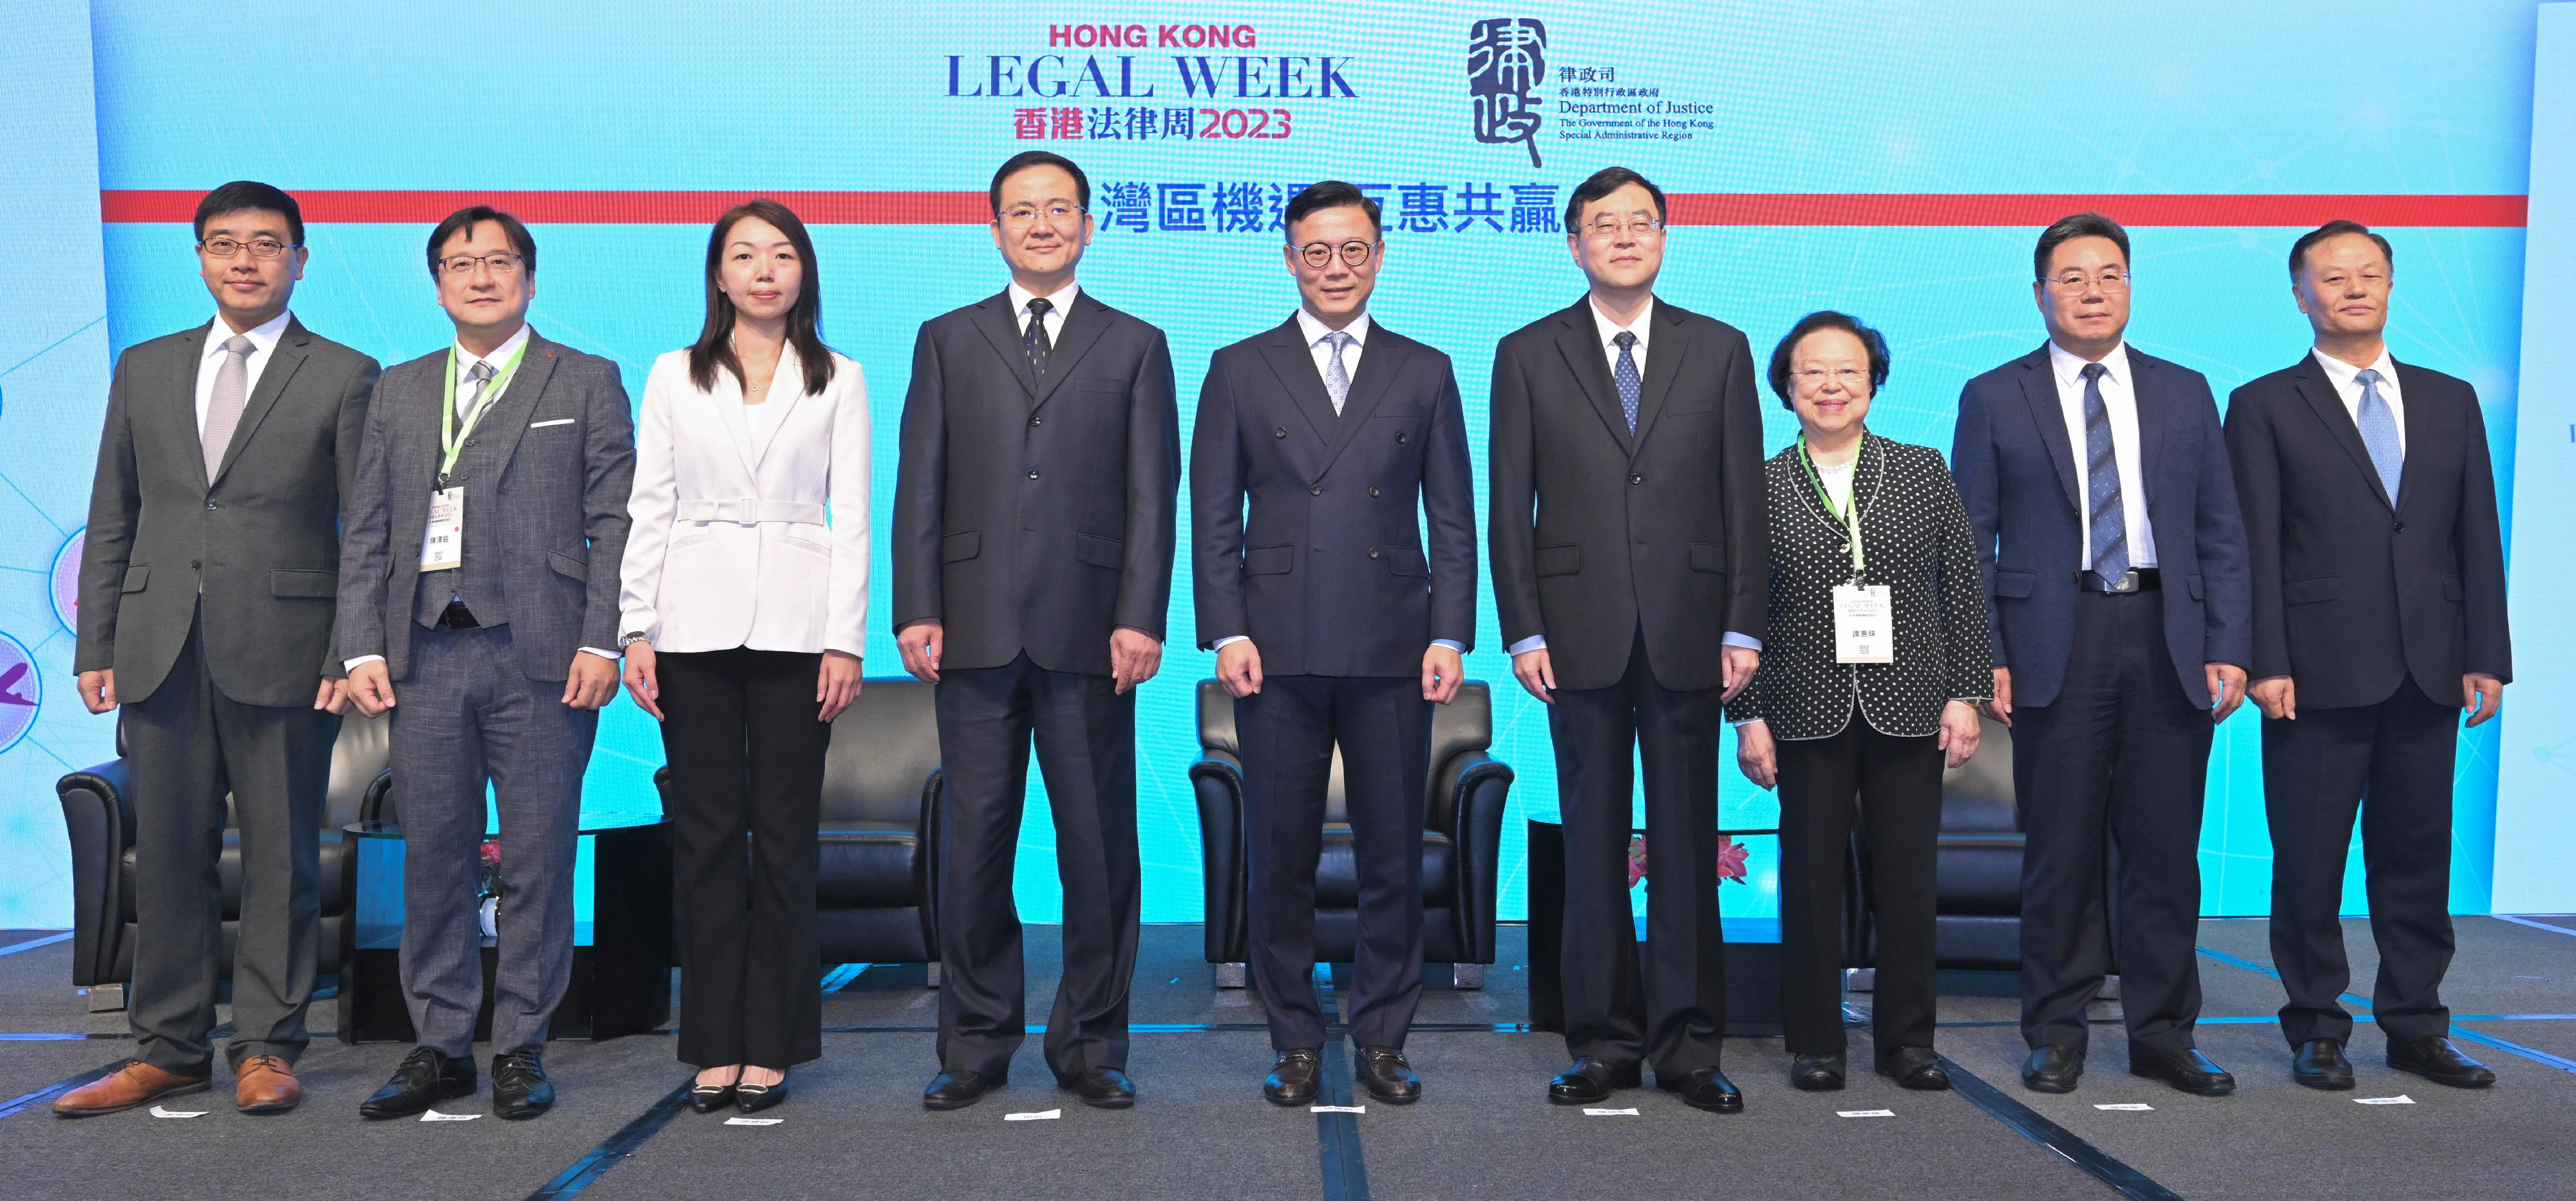 The Deputy Secretary for Justice, Mr Cheung Kwok-kwan (centre); the Director-General of the Department of Justice of Guangdong Province, Mr Chen Xudong (fourth right); the Director of the Legal Affairs Bureau of the Government of the Macao Special Administrative Region, Ms Leong Weng In (third left); the Director of the Bureau of Lawyers' Work of the Ministry of Justice, Mr Tian Xin (fourth left), and other guests are pictured at the Gateway to the Opportunities in the GBA under the Hong Kong Legal Week 2023 today (November 9).
